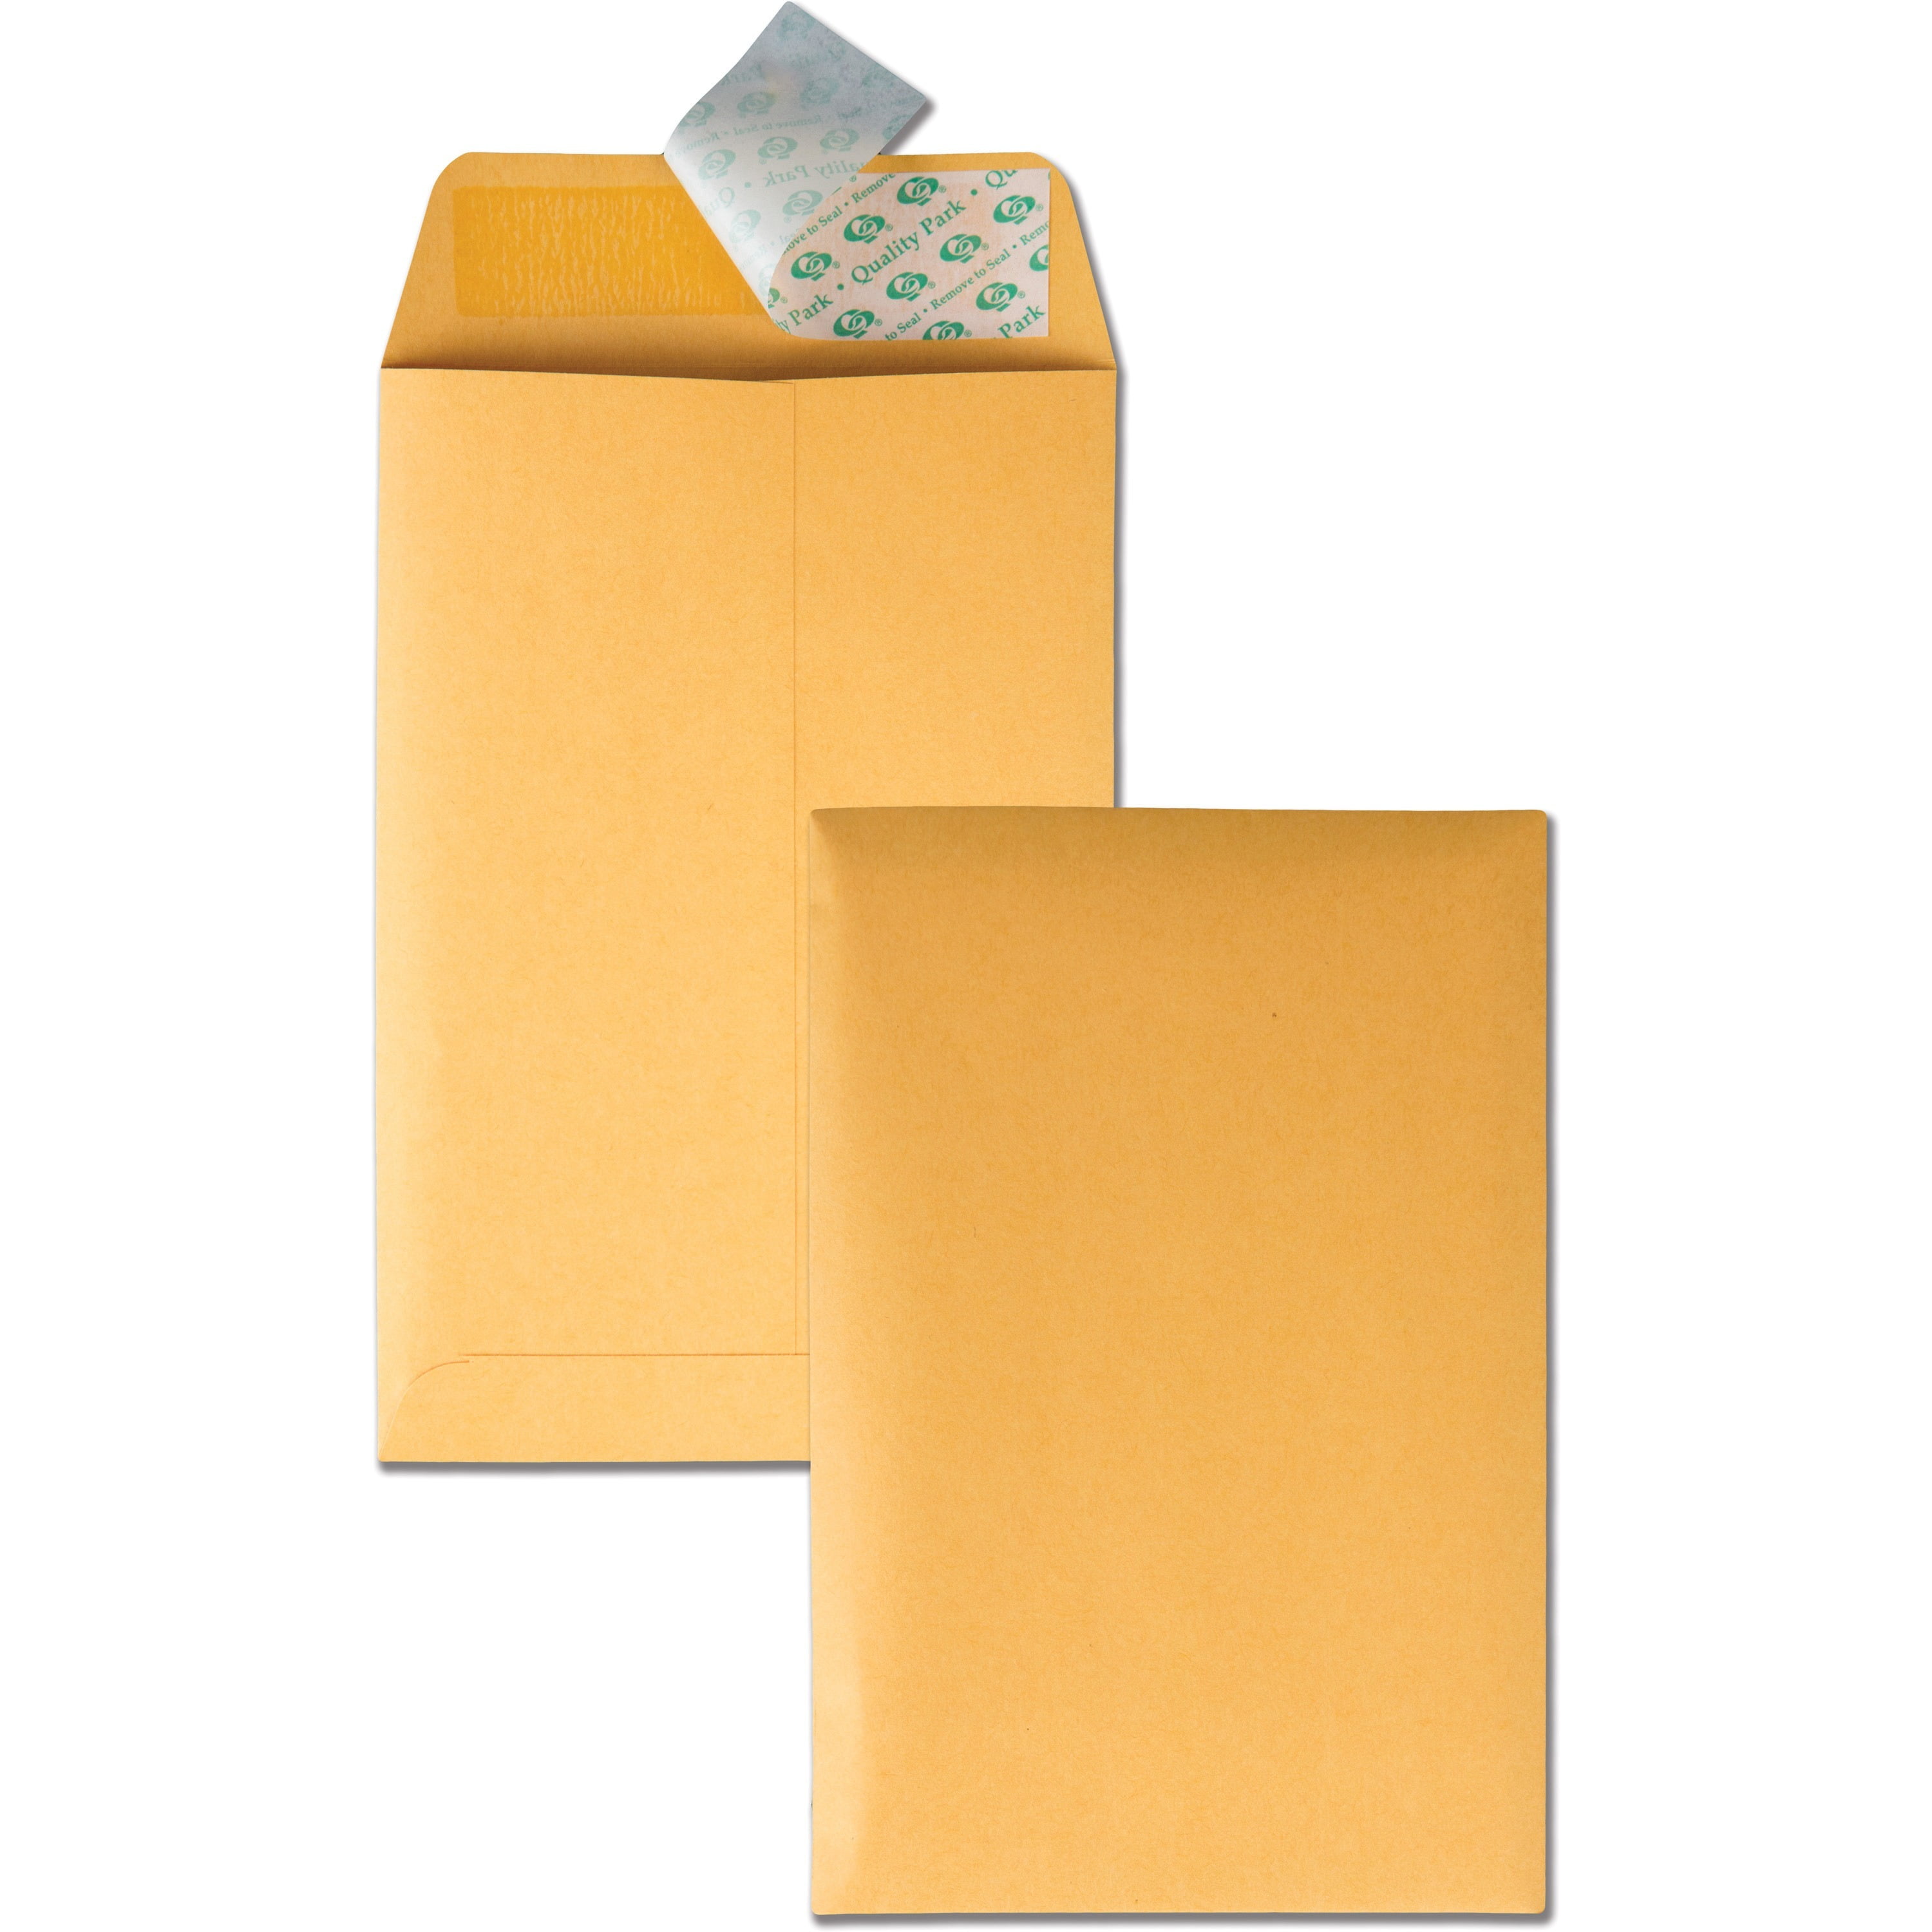 Quality Park Kraft Coin Small Parts Envelope 50560 for sale online 